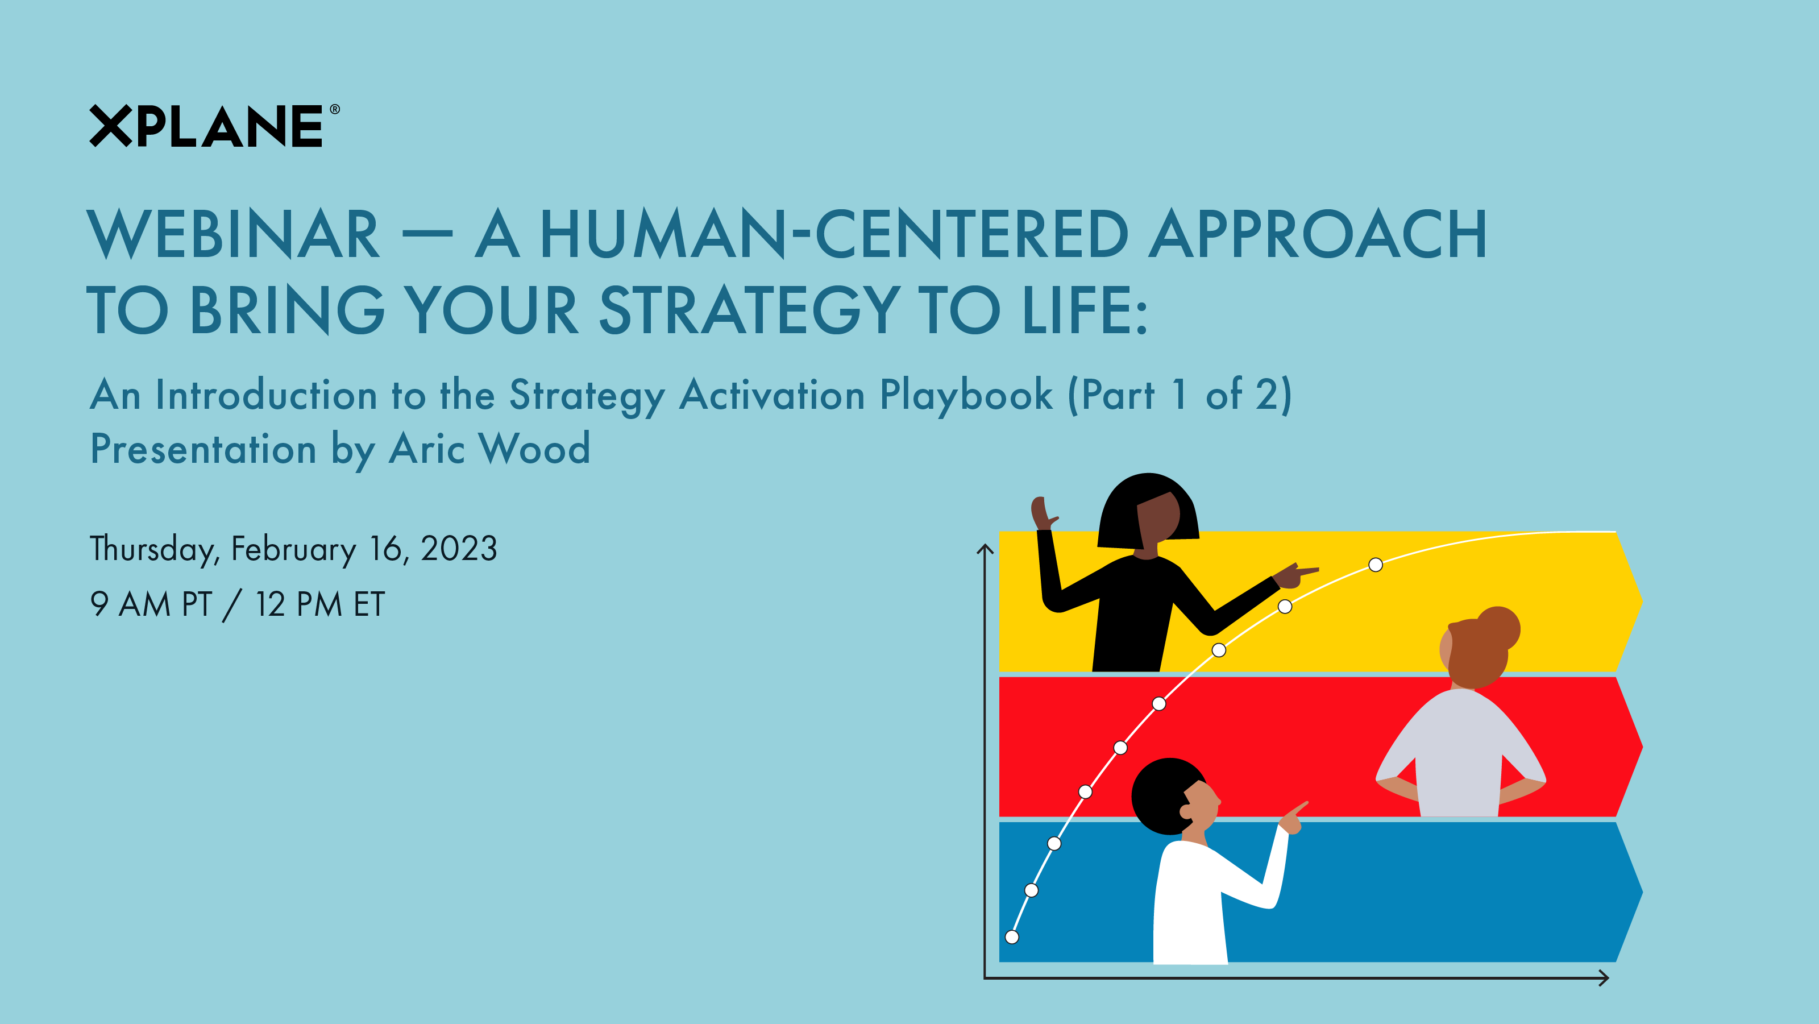 On the right, three individuals pop out of the three sections of the activation curve. On the left text read, “Webinar — A Human-Centered Approach to Bring Your Strategy to Life: An Introduction to the Strategy Activation Playbook (Part 1 of 2). Presentation by Aric Wood. Thursday, February 16 2023. 9am PT / 12pm ET.”